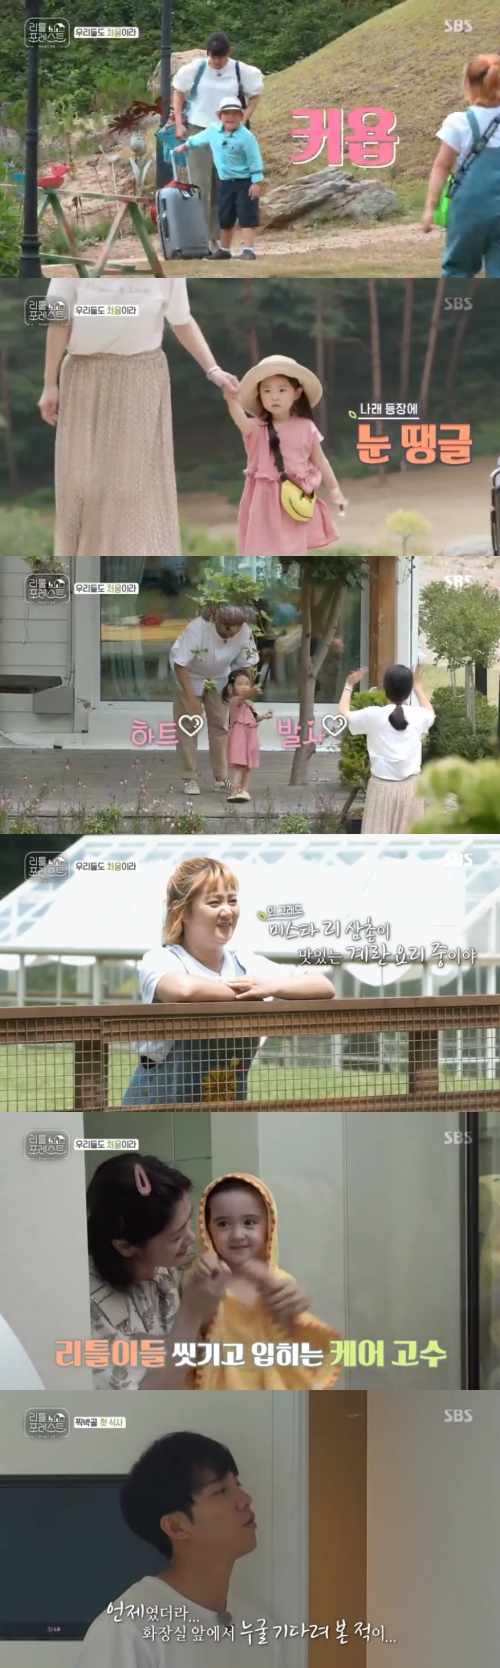 The first Haru with Little Forest has been unveiled.In the SBS entertainment program Little Forest broadcasted on the 13th, Park Na-rae, Jung So-min, Lee Seung-gi, Lee Seo-jin and Little Haru were drawn.The third Friend arrived on the day, a gallant Friend who pulled the carrier alone without the help of his mother, a seven-year-old child.Lee Seo-jin checked Lees eating habits and laughed, The children do not like ketchup more than they thought.The fourth Friend was a four-year-old child with a new accent but a broken accent.Eugene was nervous about the appearance of unfamiliar friends and carers, but he smiled when he saw Lee Hyun, the same age friend.Lee Hyun also relaxed when he saw Eugene and made a warm feeling.Lee Seo-jin did not leave the kitchen with cooking preparation.Park Na-rae confirmed the childrens ketchup taste on behalf of Lee Seo-jin and laughed, confessing, My Mr. Lee made ketchup only yesterday.Park Na-rae and Lee Seung-gi then took the children to animal farms.Park Na-rae said his fatal shortcoming was being afraid of chickens, leaving five children to Lee Seung-gi and pacing outside the farm.Lee Seung-gi asked one of the children if he could open the chicken coop door and helped him to get the eggs out after he was allowed.He also watched the rabbits and watched the gathering cycle in line with the childrens doctors.But Lee Seung-gi was not enough to care for five children alone, all of them playing and needing Lee Seung-gis hands.Park Na-rae watched it outside the farm, telling Lee Seung-gi, Im sorry, Im sorry, a heartfelt apology.But Park Na-rae was also in a situation where he was inundated with work to do.I had to go home to get sunscreen to apply to my children, and I had to go back to my house again to get a broom and a dustpan.Lee Seung-gi also expressed confusion, saying, I can not put sunscreen on, clean up the rabbits, and I can not do it alone.While Lee Seung-gi was clearing the chicken coop and rabbit coop, Park Na-rae had a hectic time applying sunscreen to the children.Among them, Lee Seo-jin and Jung So-min prepared childrens meals; Jung So-min was more adept than anyone in childrens care, but as blank as in cooking.While Jung So-min was in charge of egg soup and was in a bad dish, Lee Seo-jin watched Jung So-min and pointed out, You should not cook like this.By the time Jung So-min omerates with Lee Seo-jin table chopped vegetables, Park Na-rae, Lee Seung-gi and the children were back.Lee Han-yi embarrassed the carers with the sound of I hate Omrais in the sound of lunch menu called Omrais.Lee Seo-jin, in turn, was a favorite of the children with his spleen weapon, whirlwind egg zidan, a healthy, delicious bowl of homemade ketchup that went up to the highlights.The carers laughed at the childrens food, but they were despairing that they did not have their own rice.It was not easy to feed the children. Lee Han, who hated Omrais, said, It is not delicious. I want to eat only soup.It was real child care.